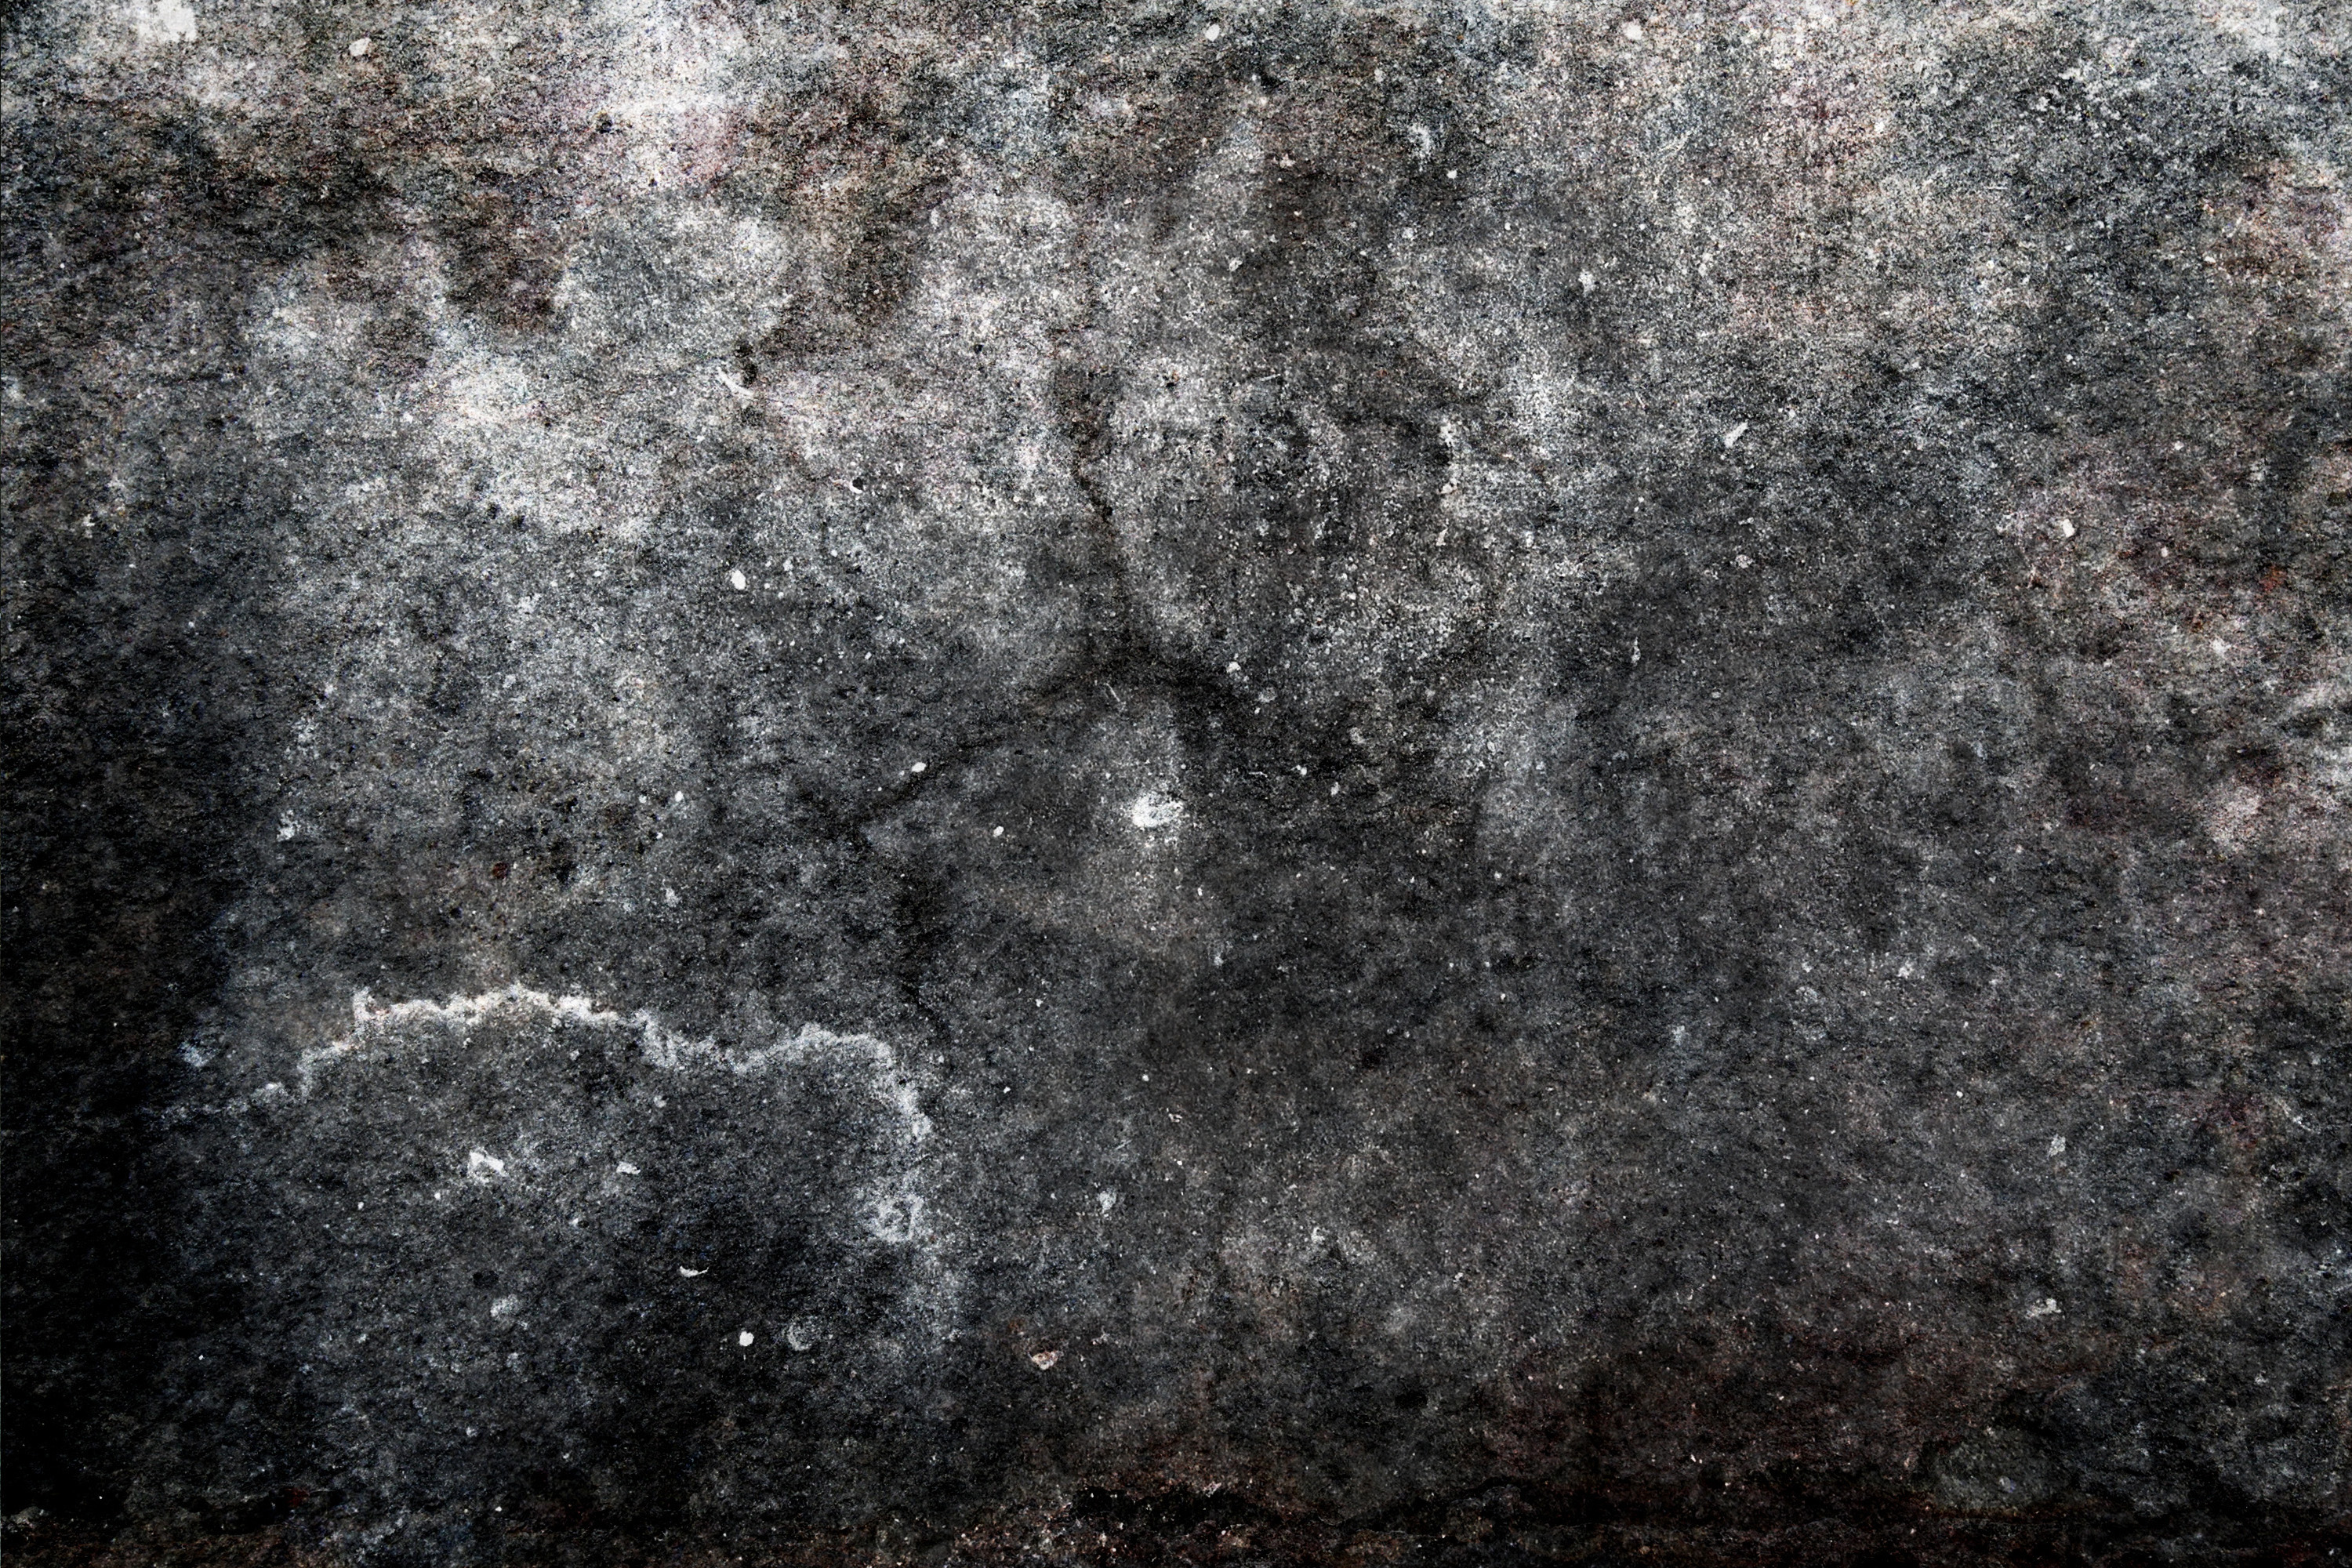 from gritty grunge textures from gritty grunge textures from vintage